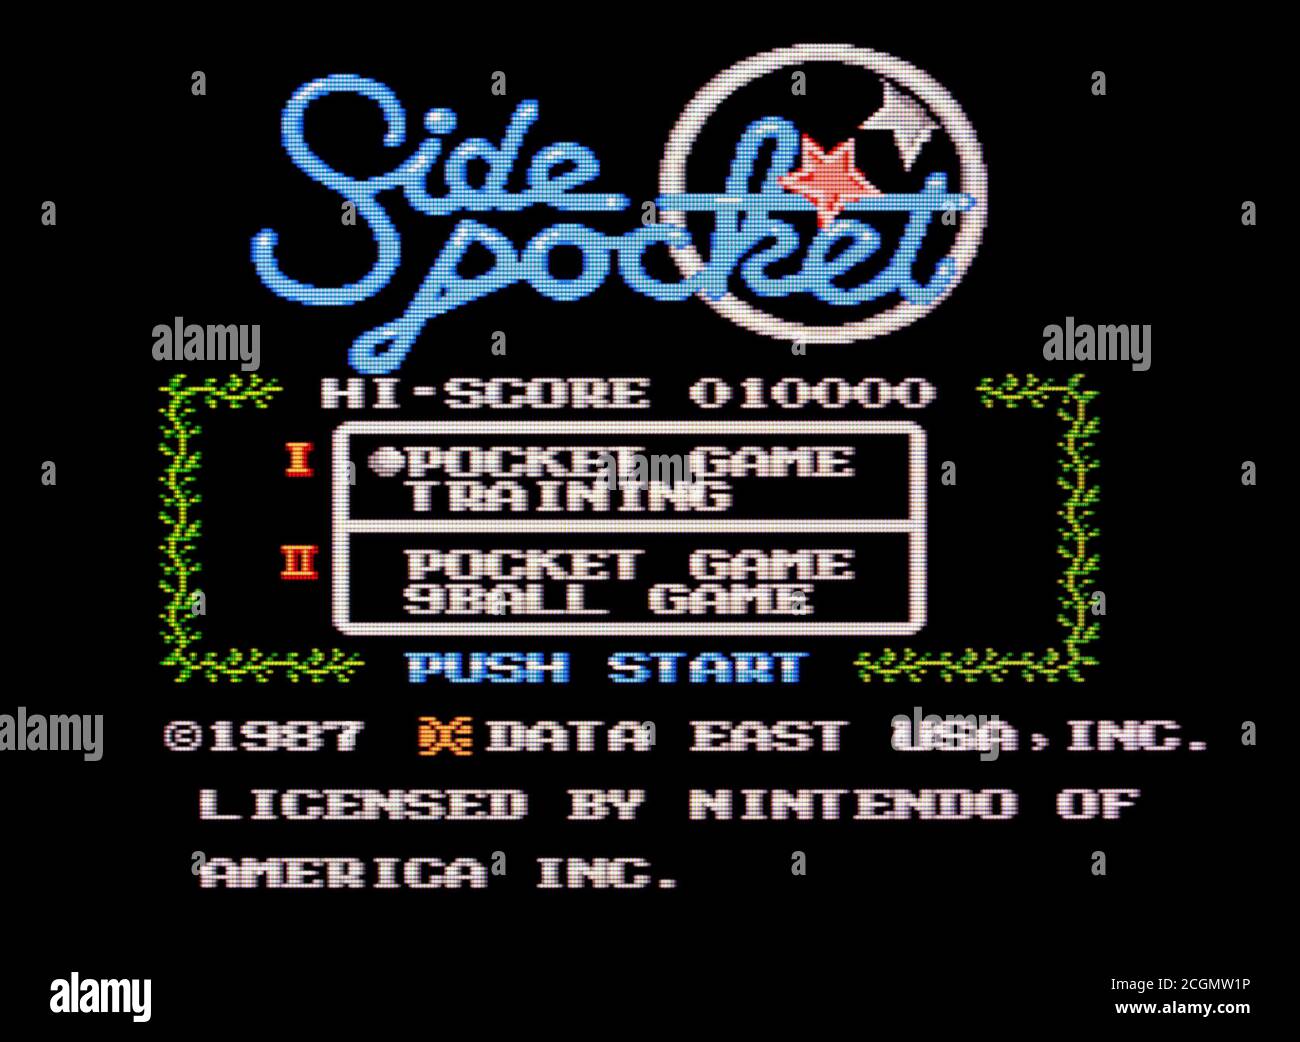 Side Pocket - Nintendo Entertainment System - NES Videogame - Editorial use  only Stock Photo - Alamy